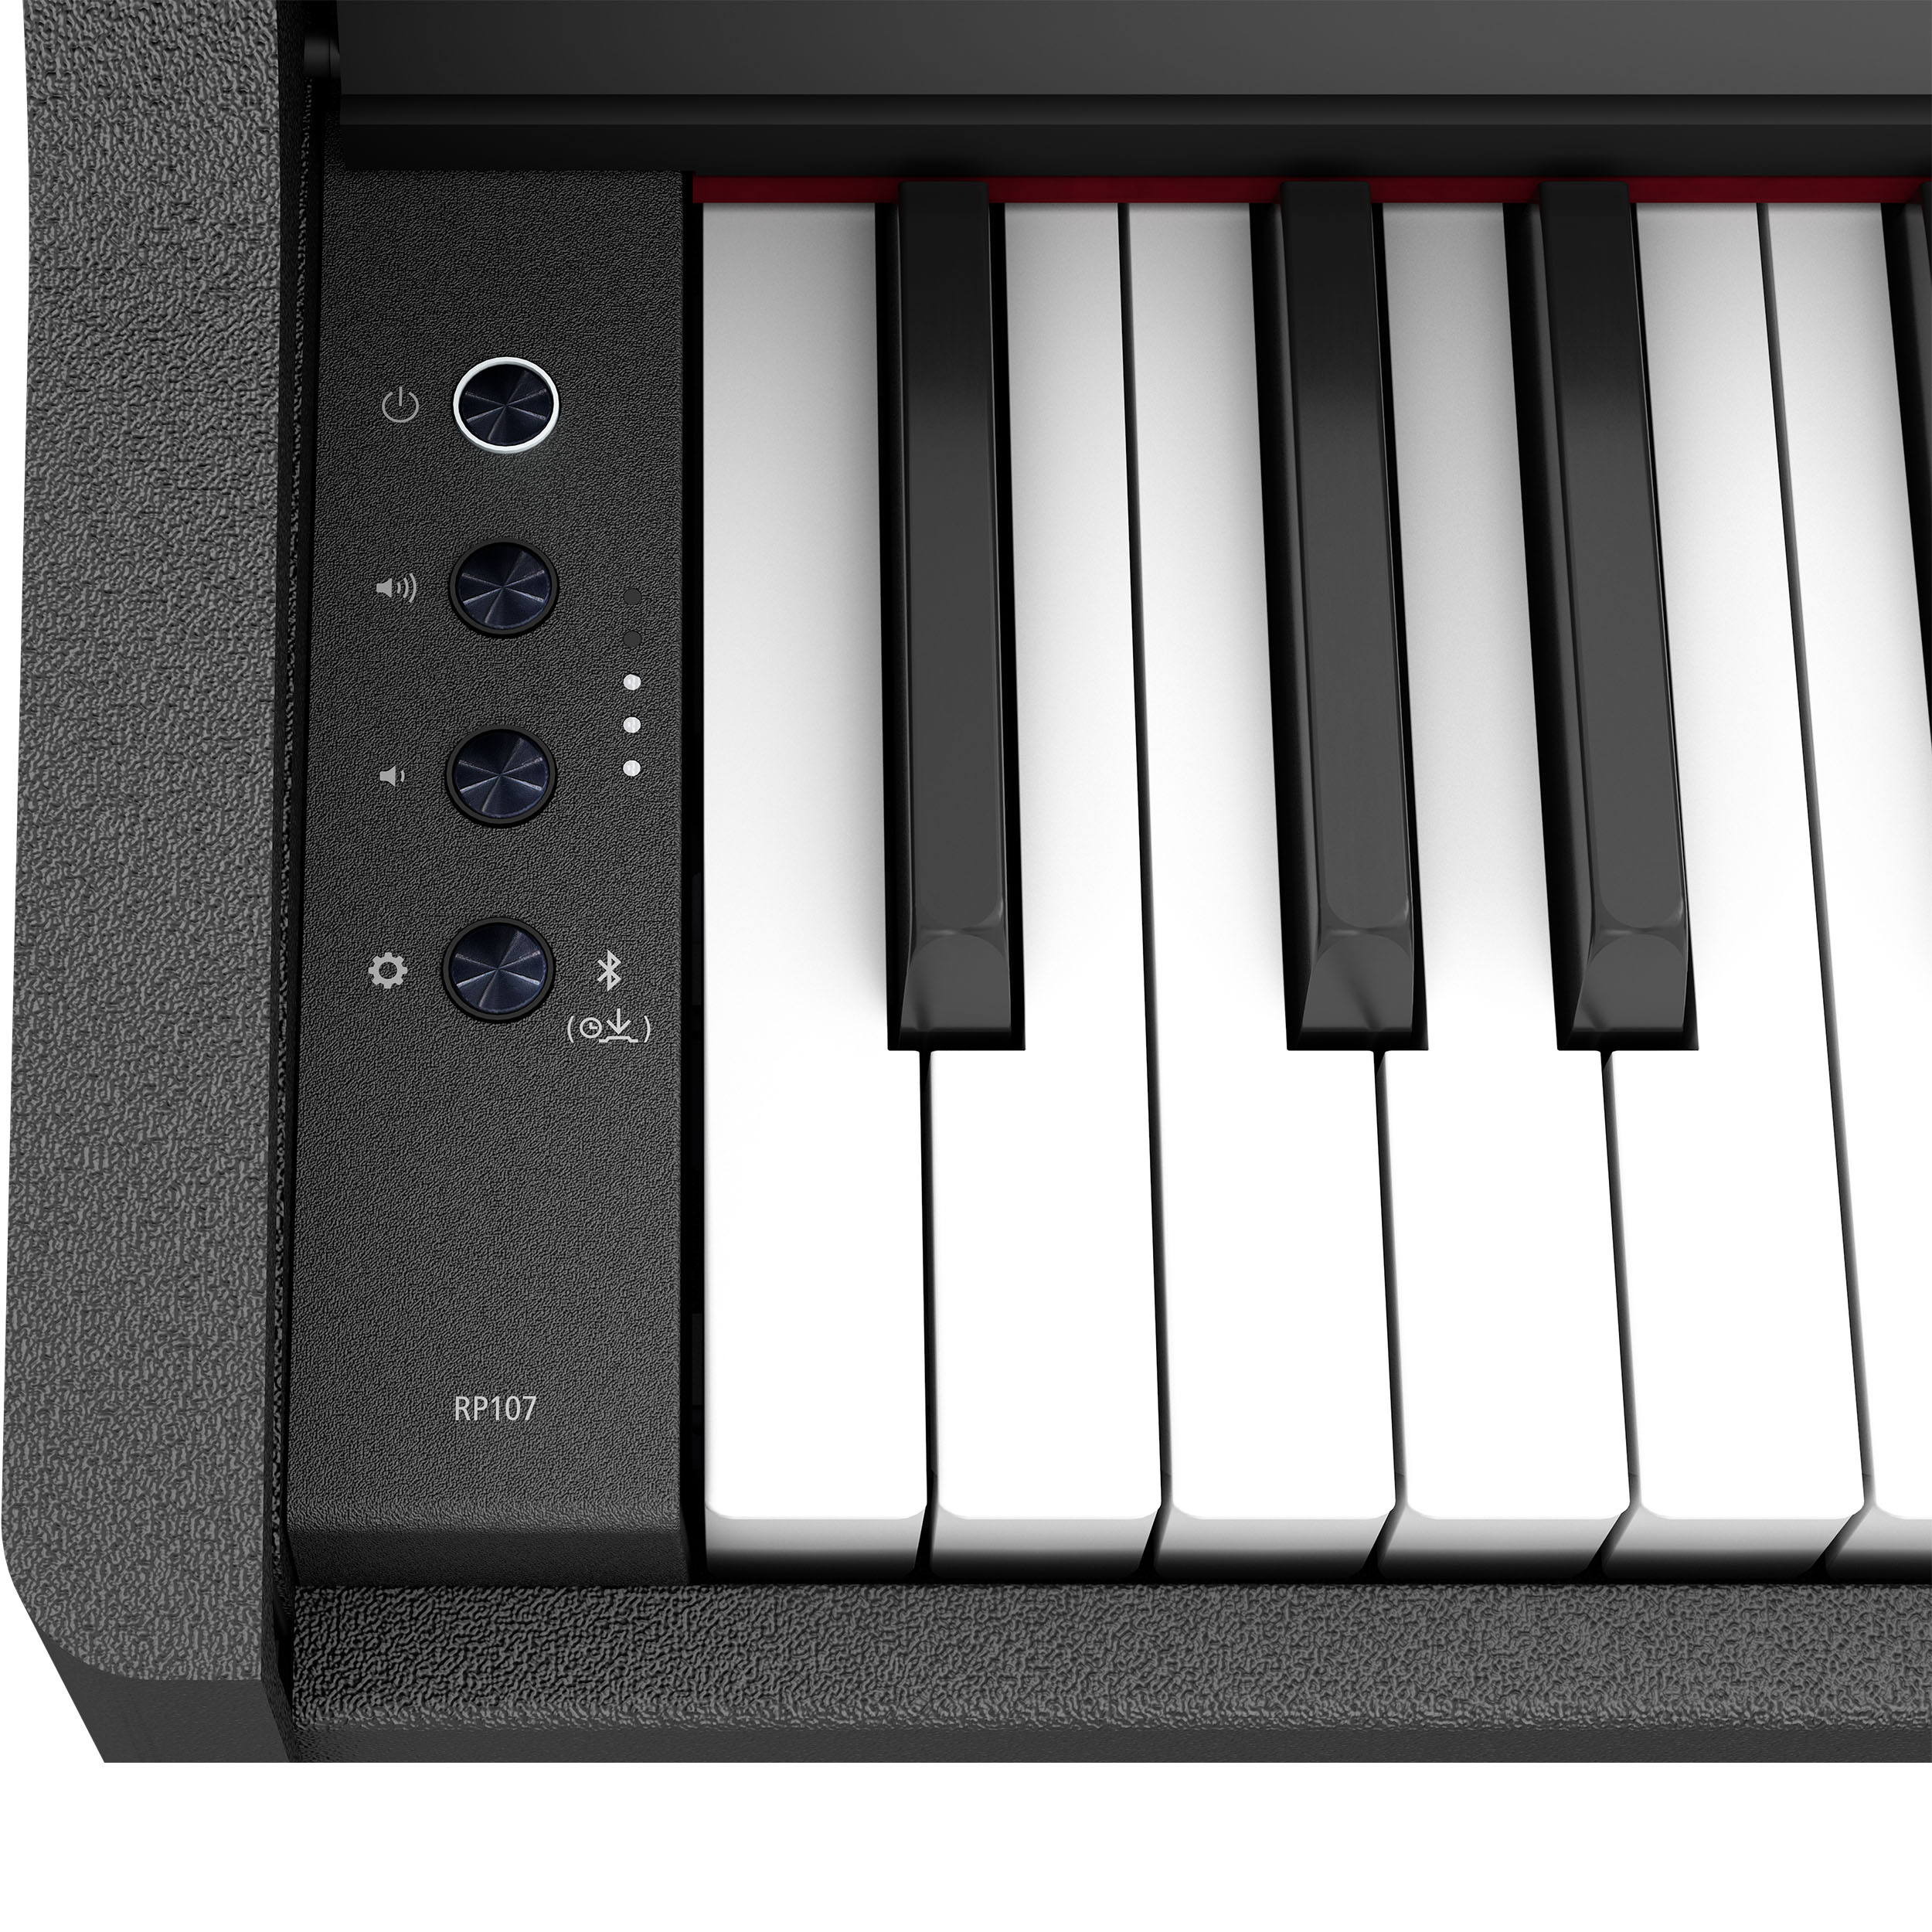 Roland Rp107-bkx - Digital piano with stand - Variation 5